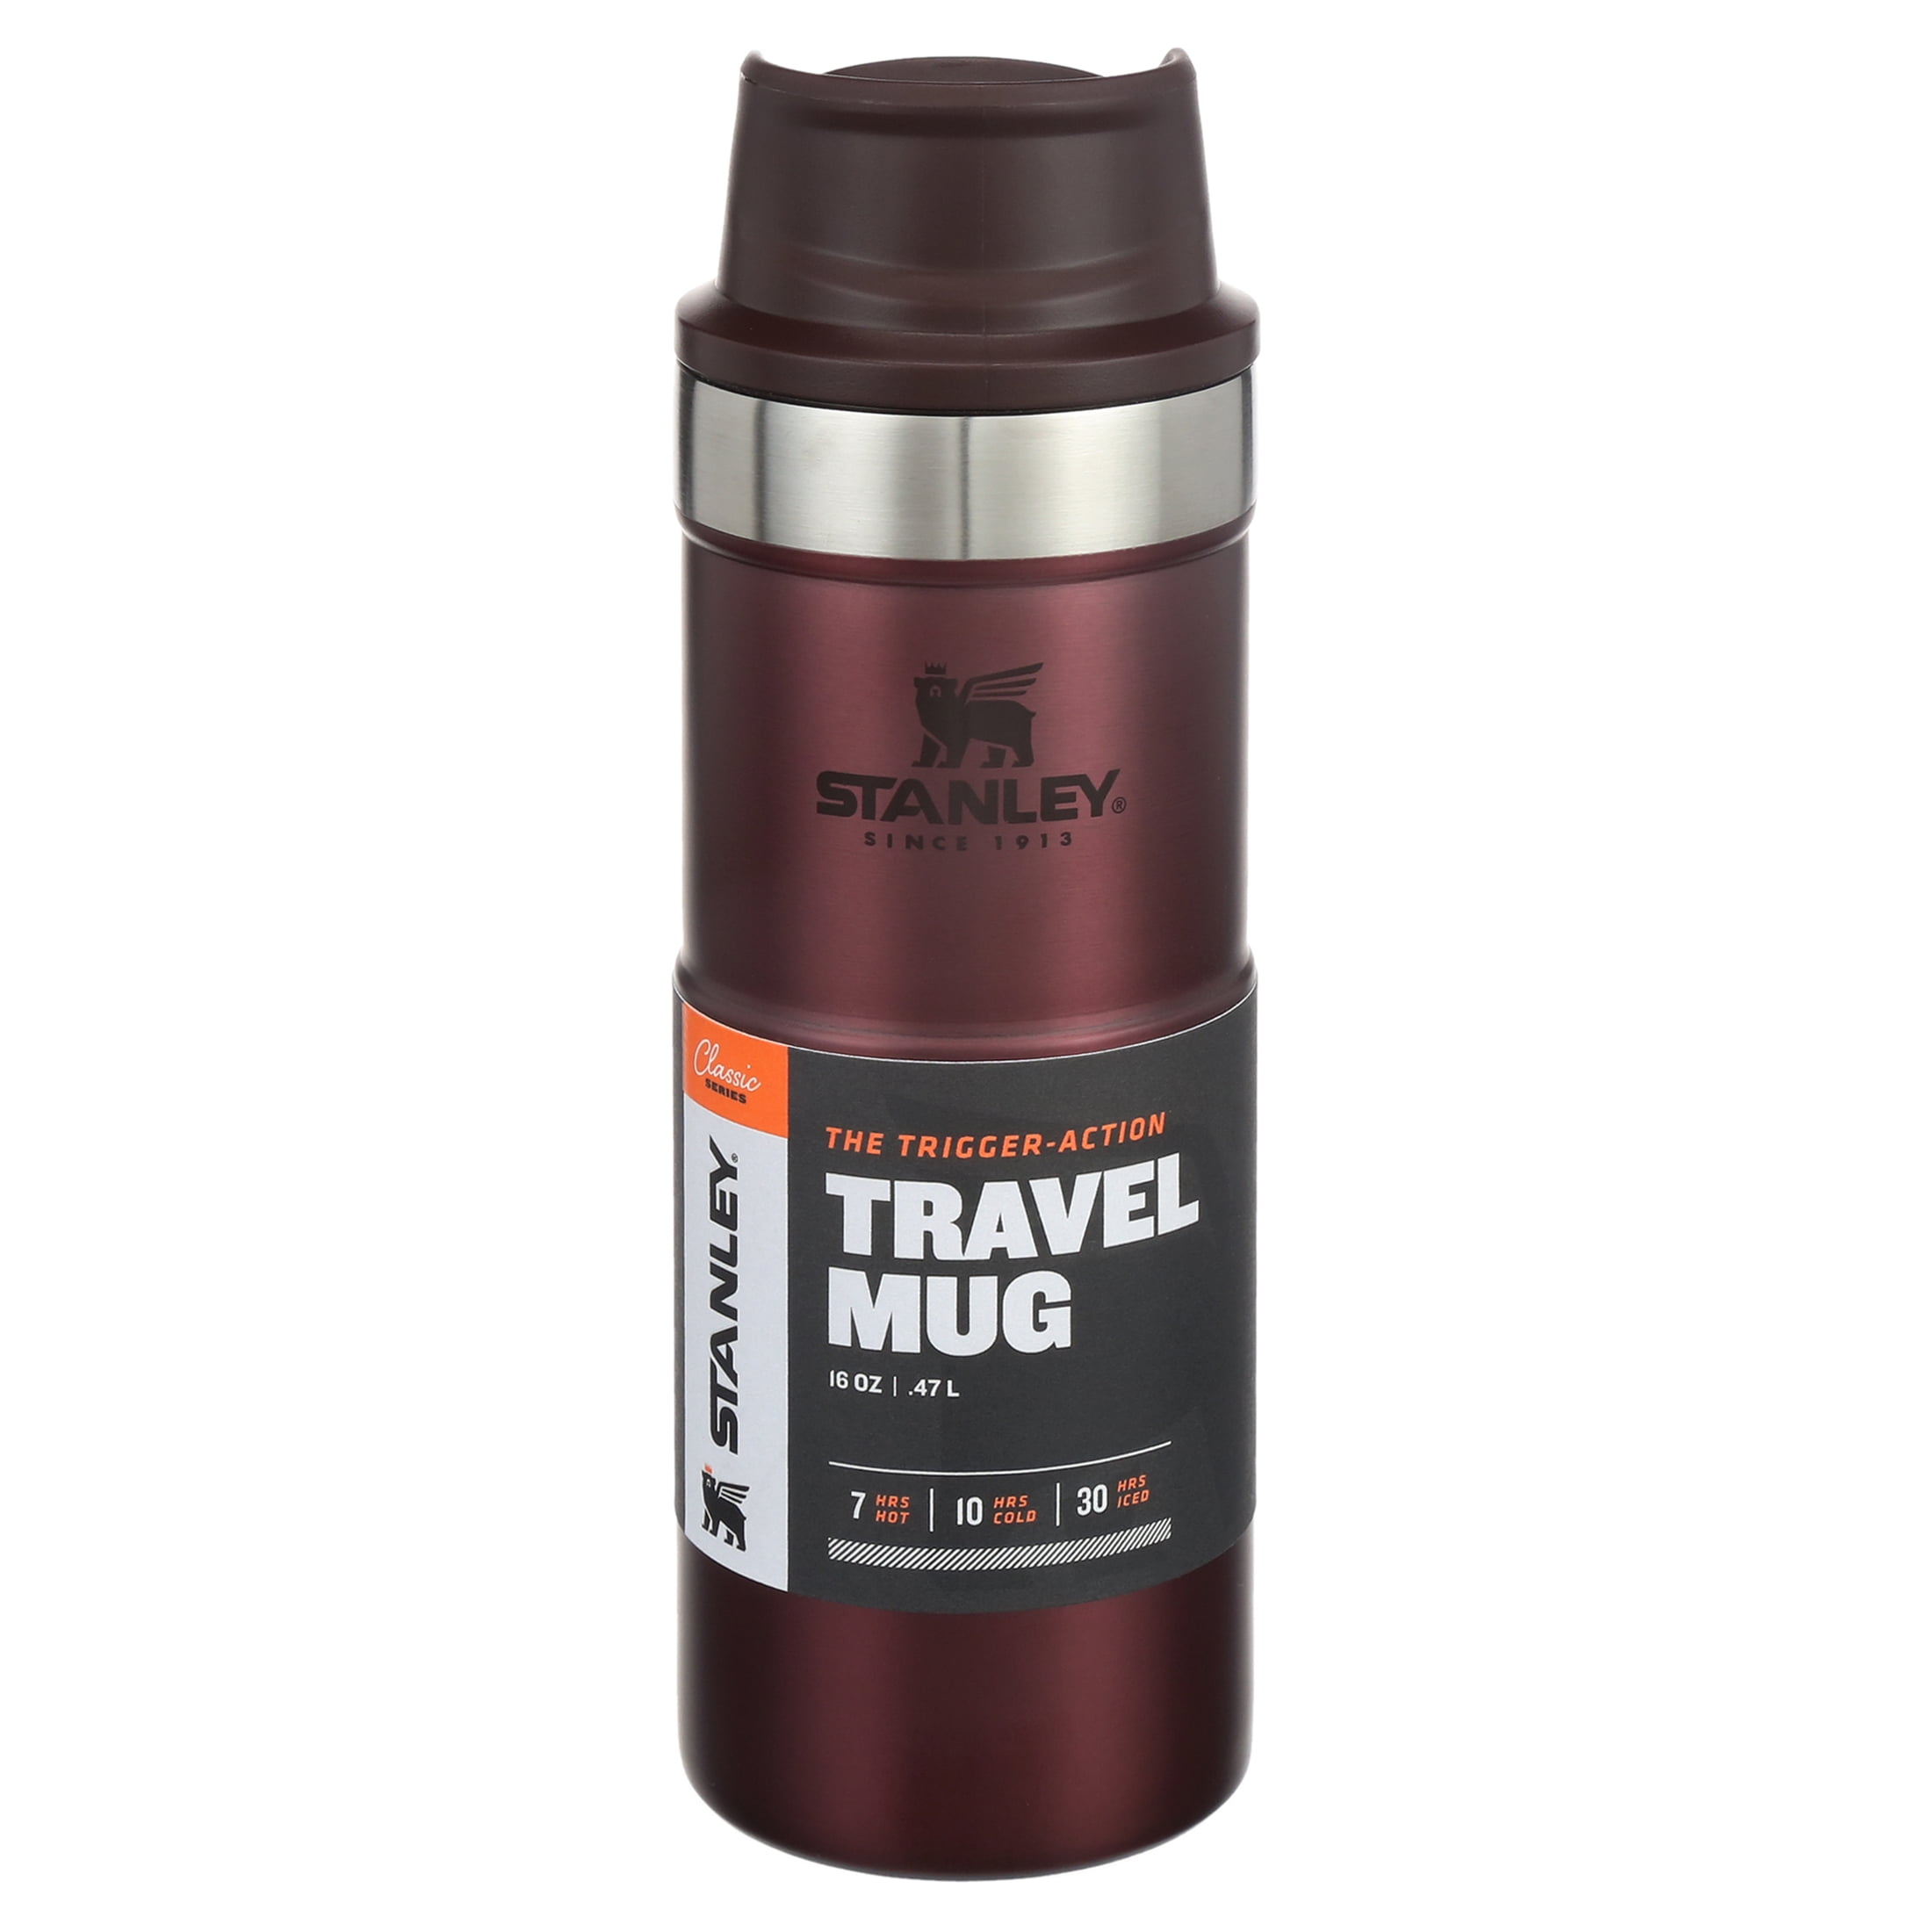 STANLEY CLASSIC TRIGGER-ACTION TRAVEL MUG  16 OZ $16 Each - household  items - by owner - housewares sale - craigslist